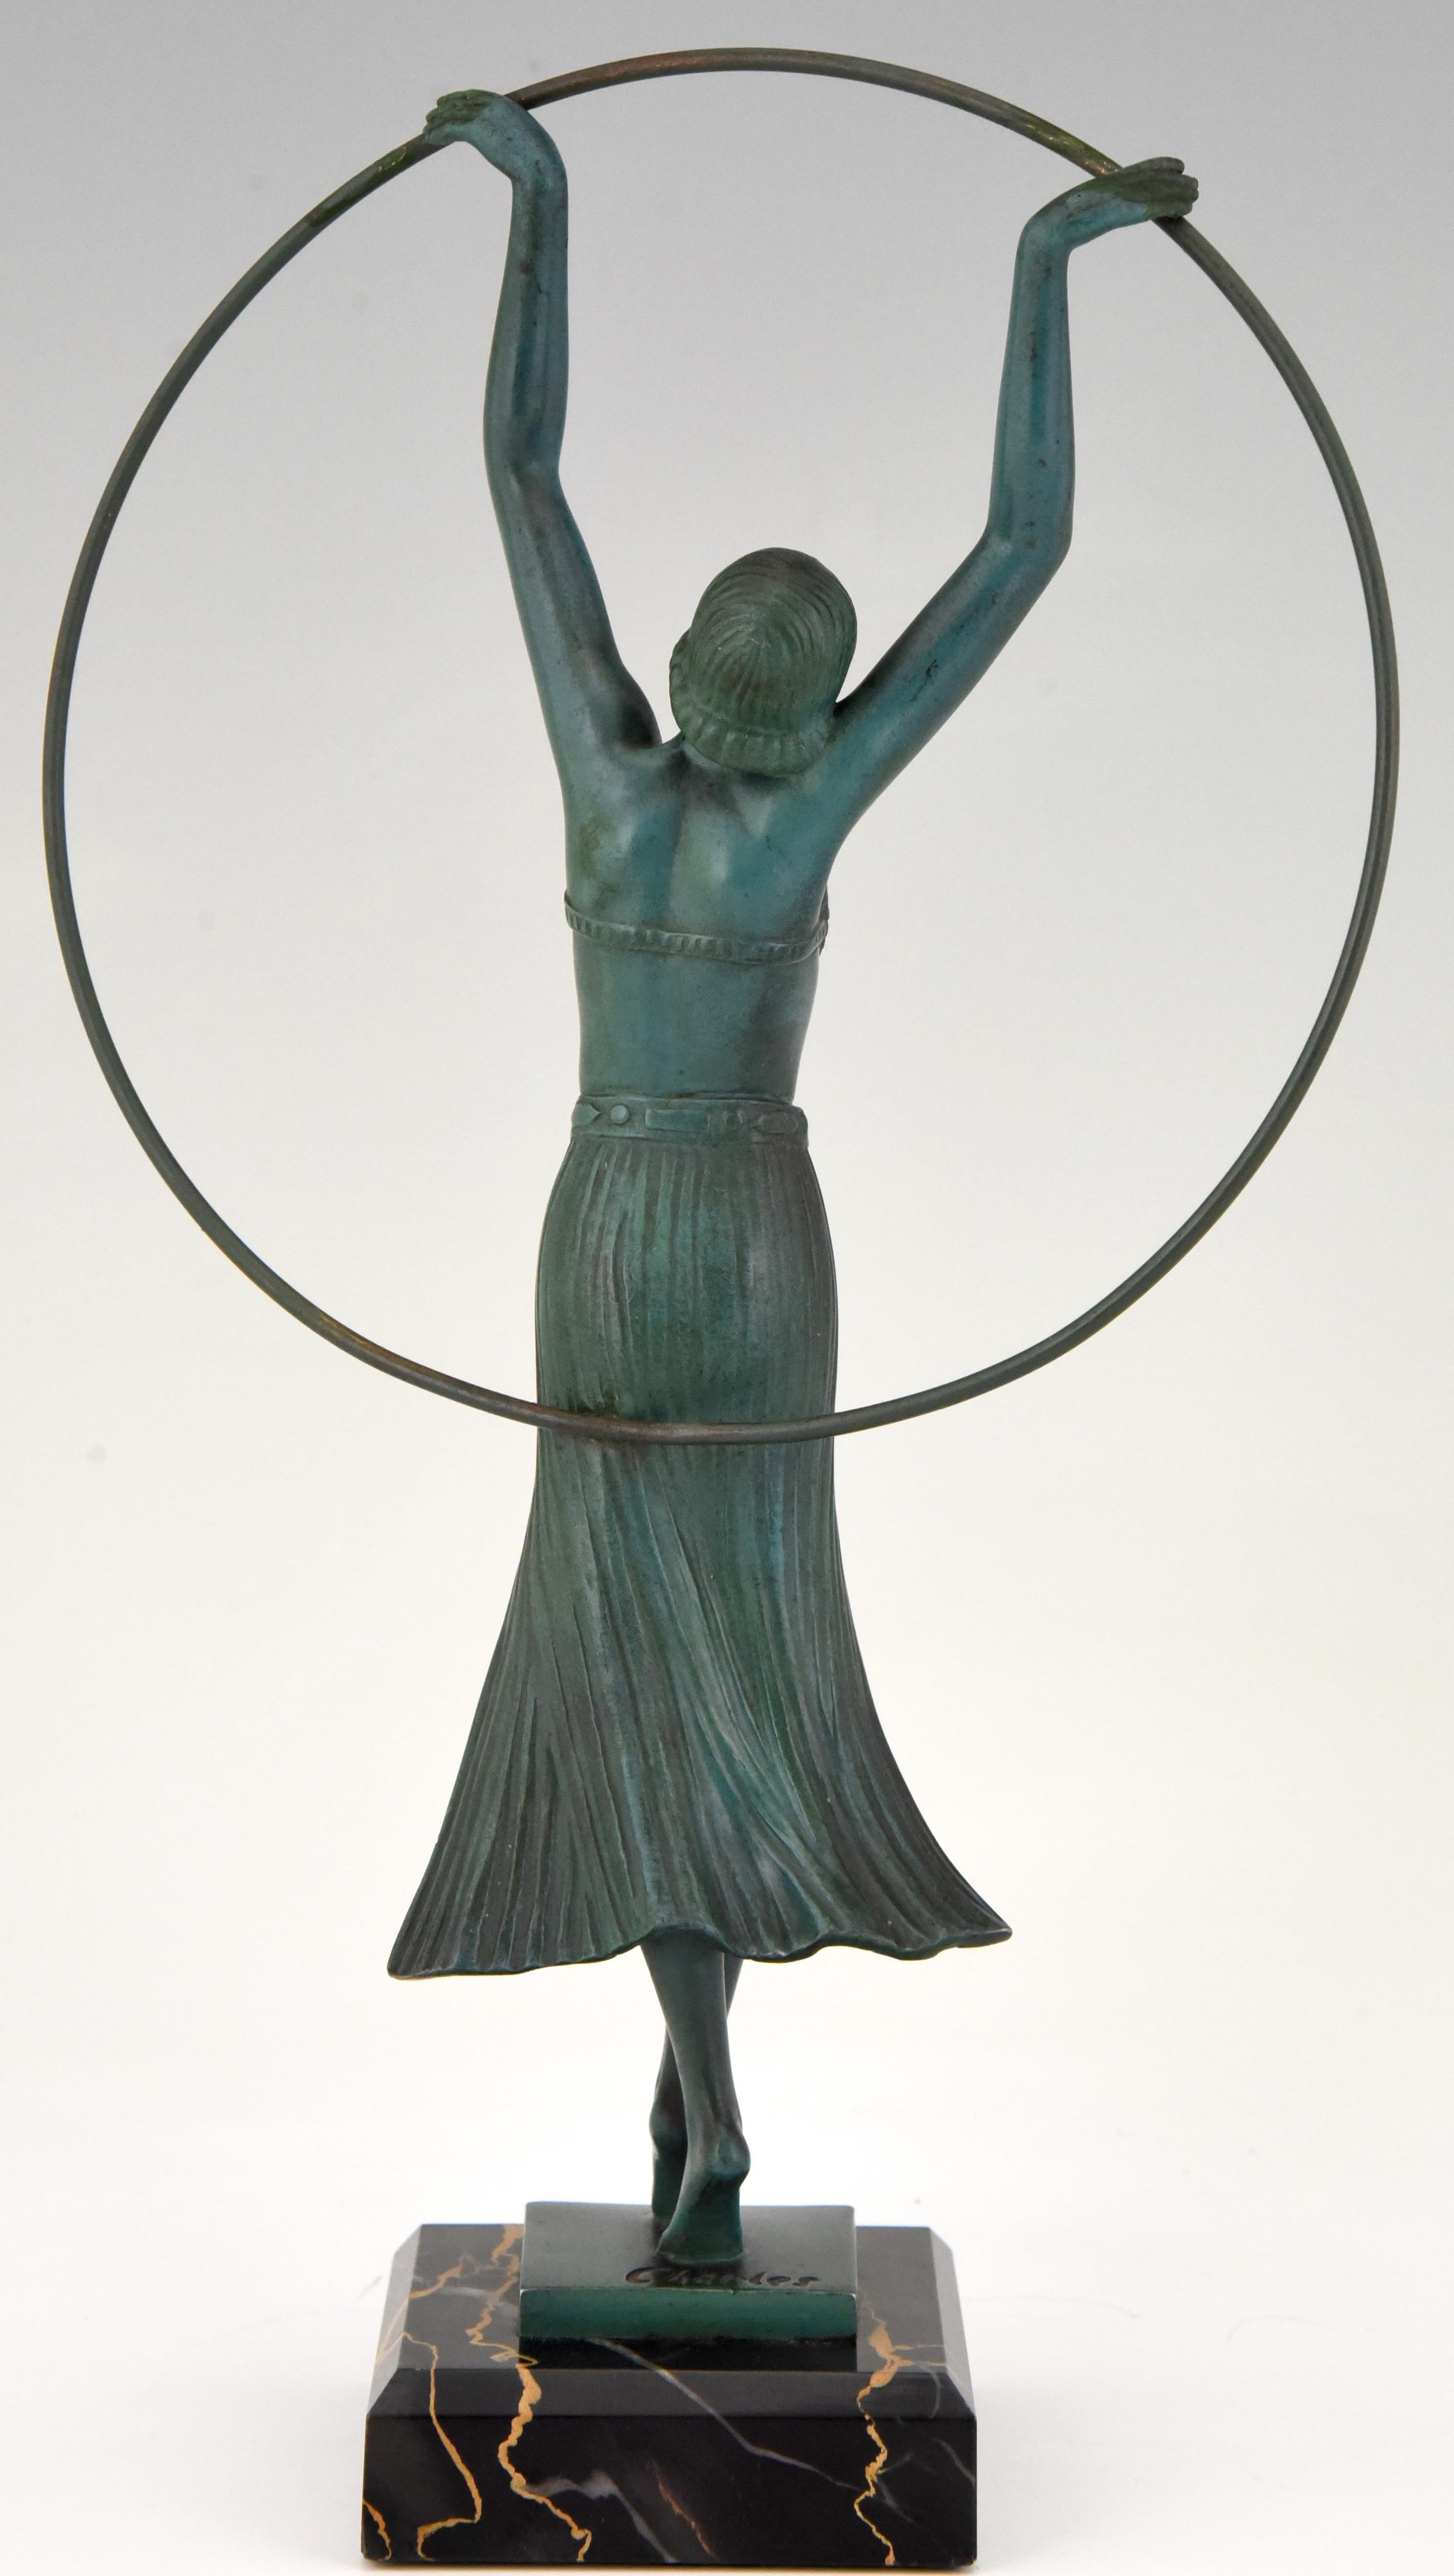 Patinated Art Deco Sculpture Lady Hoop Dancer by Charles for Max Le Verrier, France, 1930